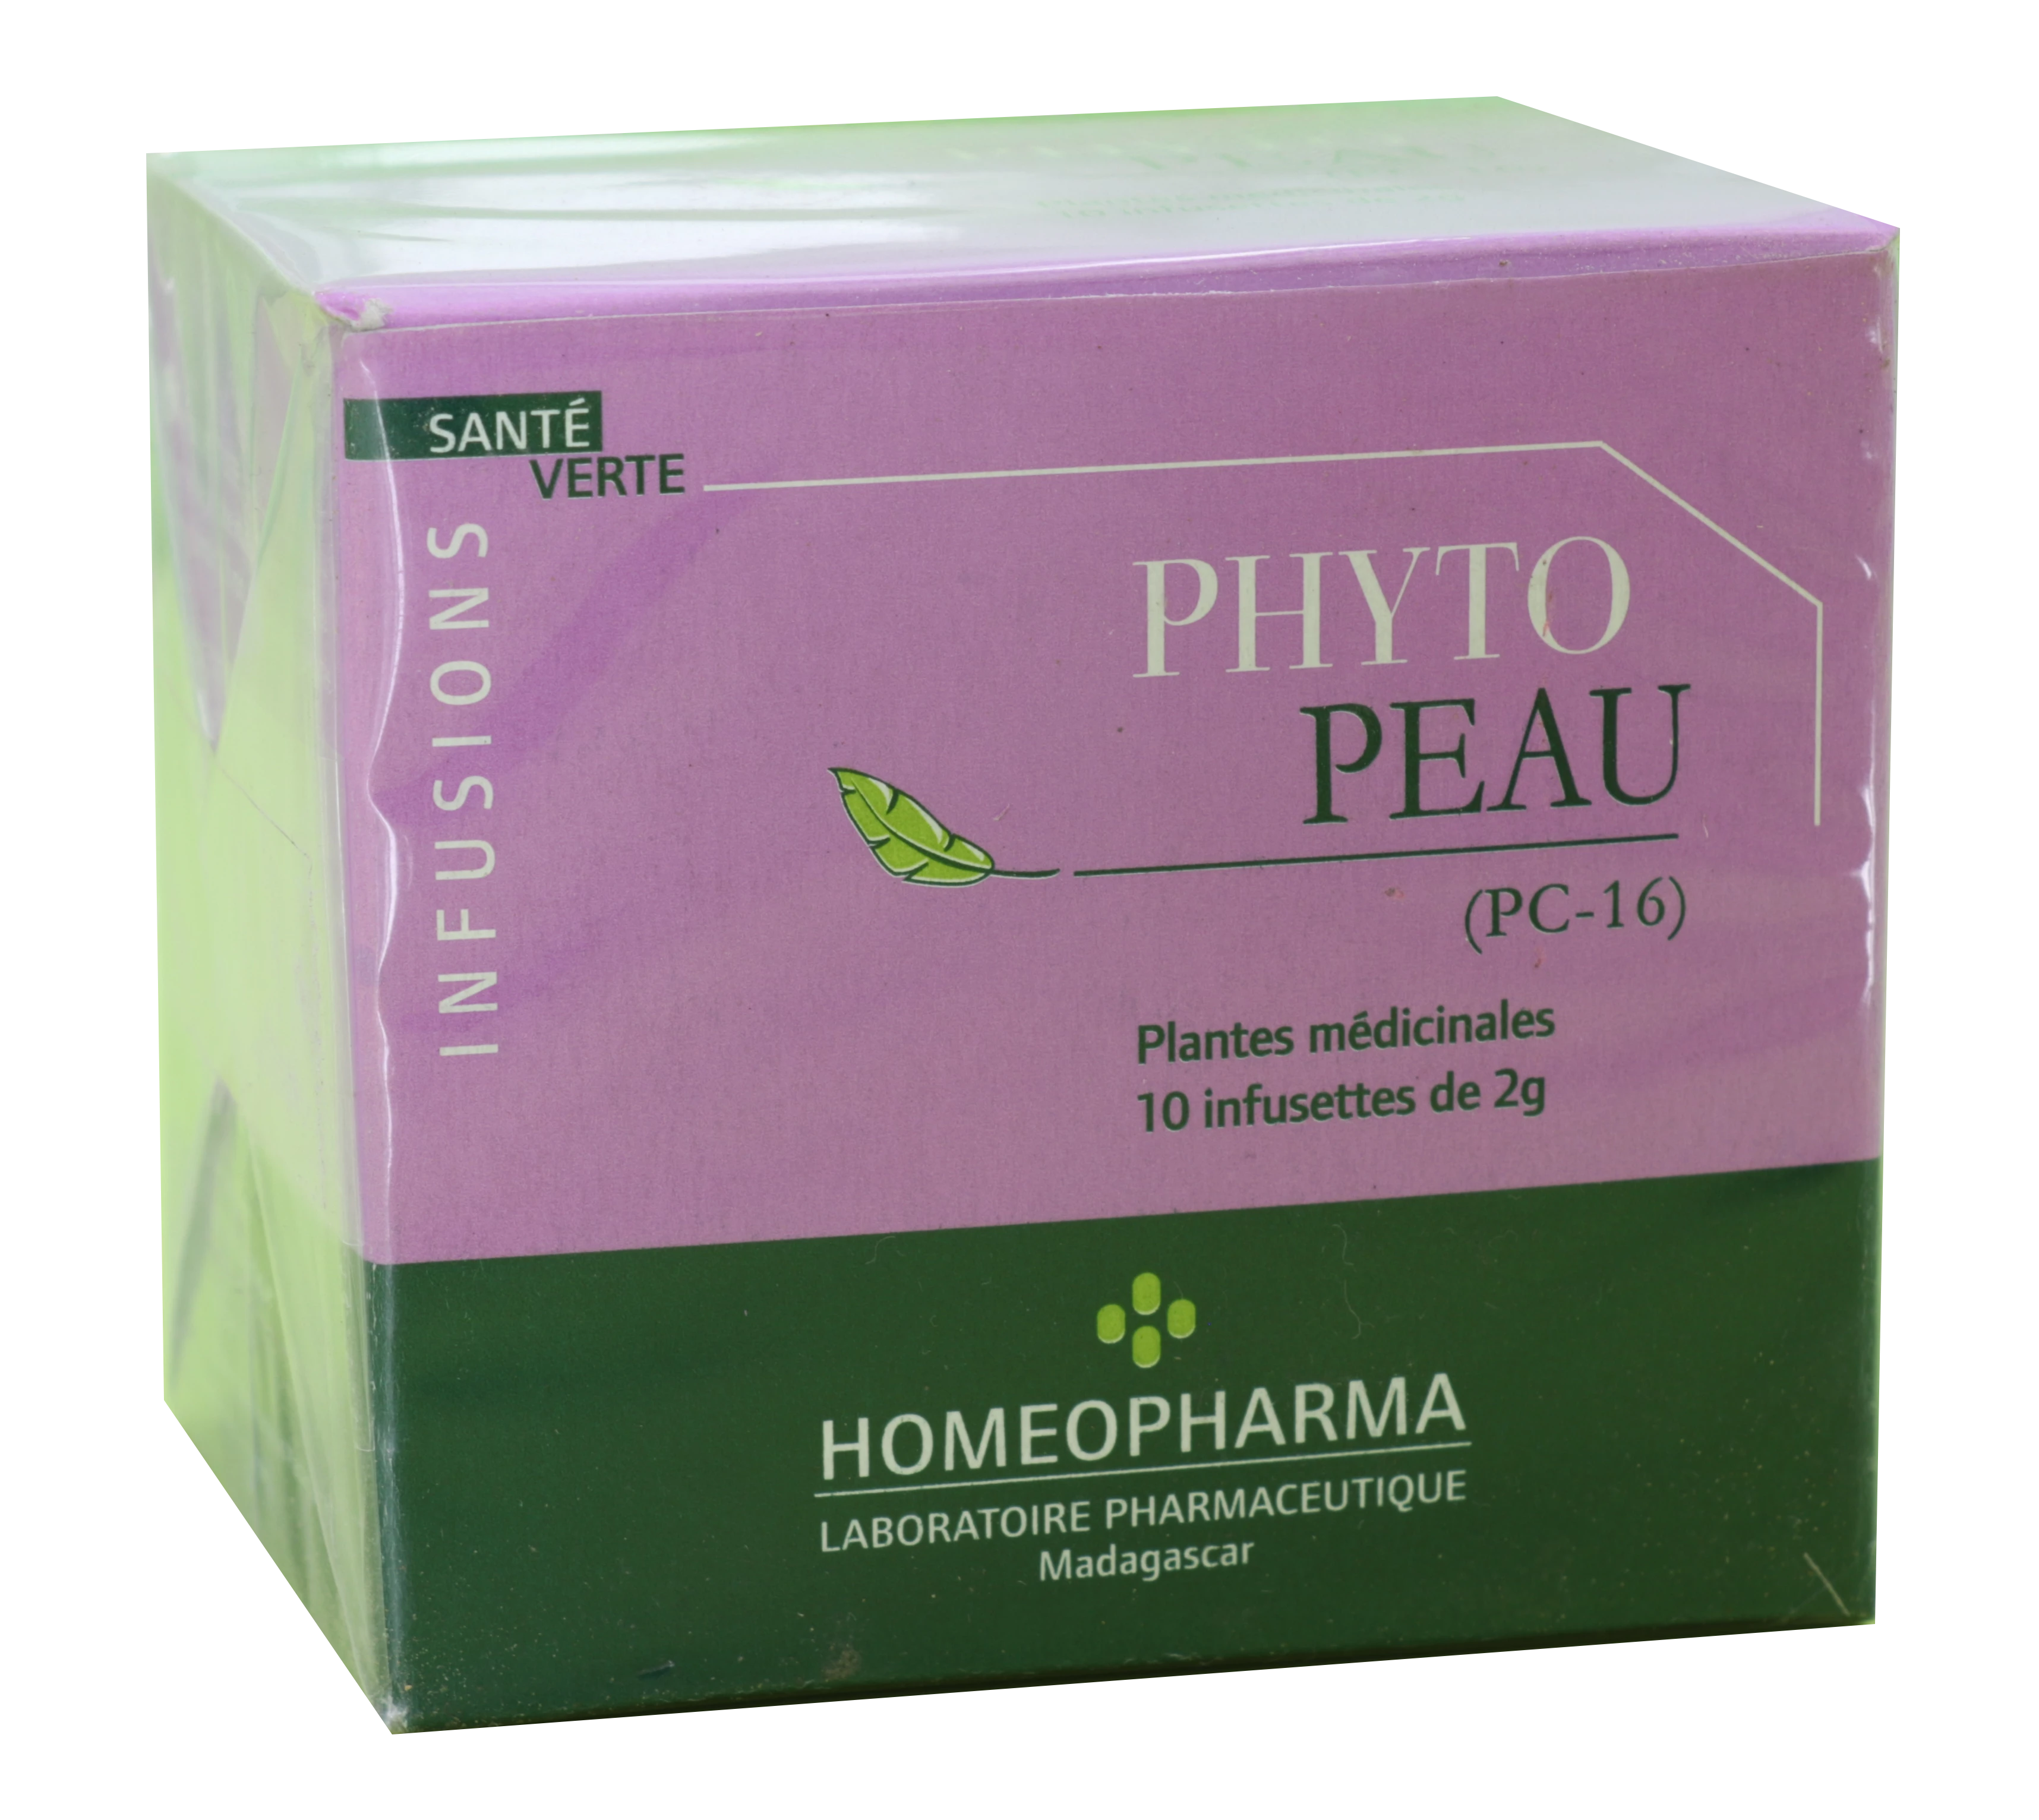 Traditionelle Phytotherapie Pc16-phyto-peau Box 20 Infusetten - HOMEOPHARMA